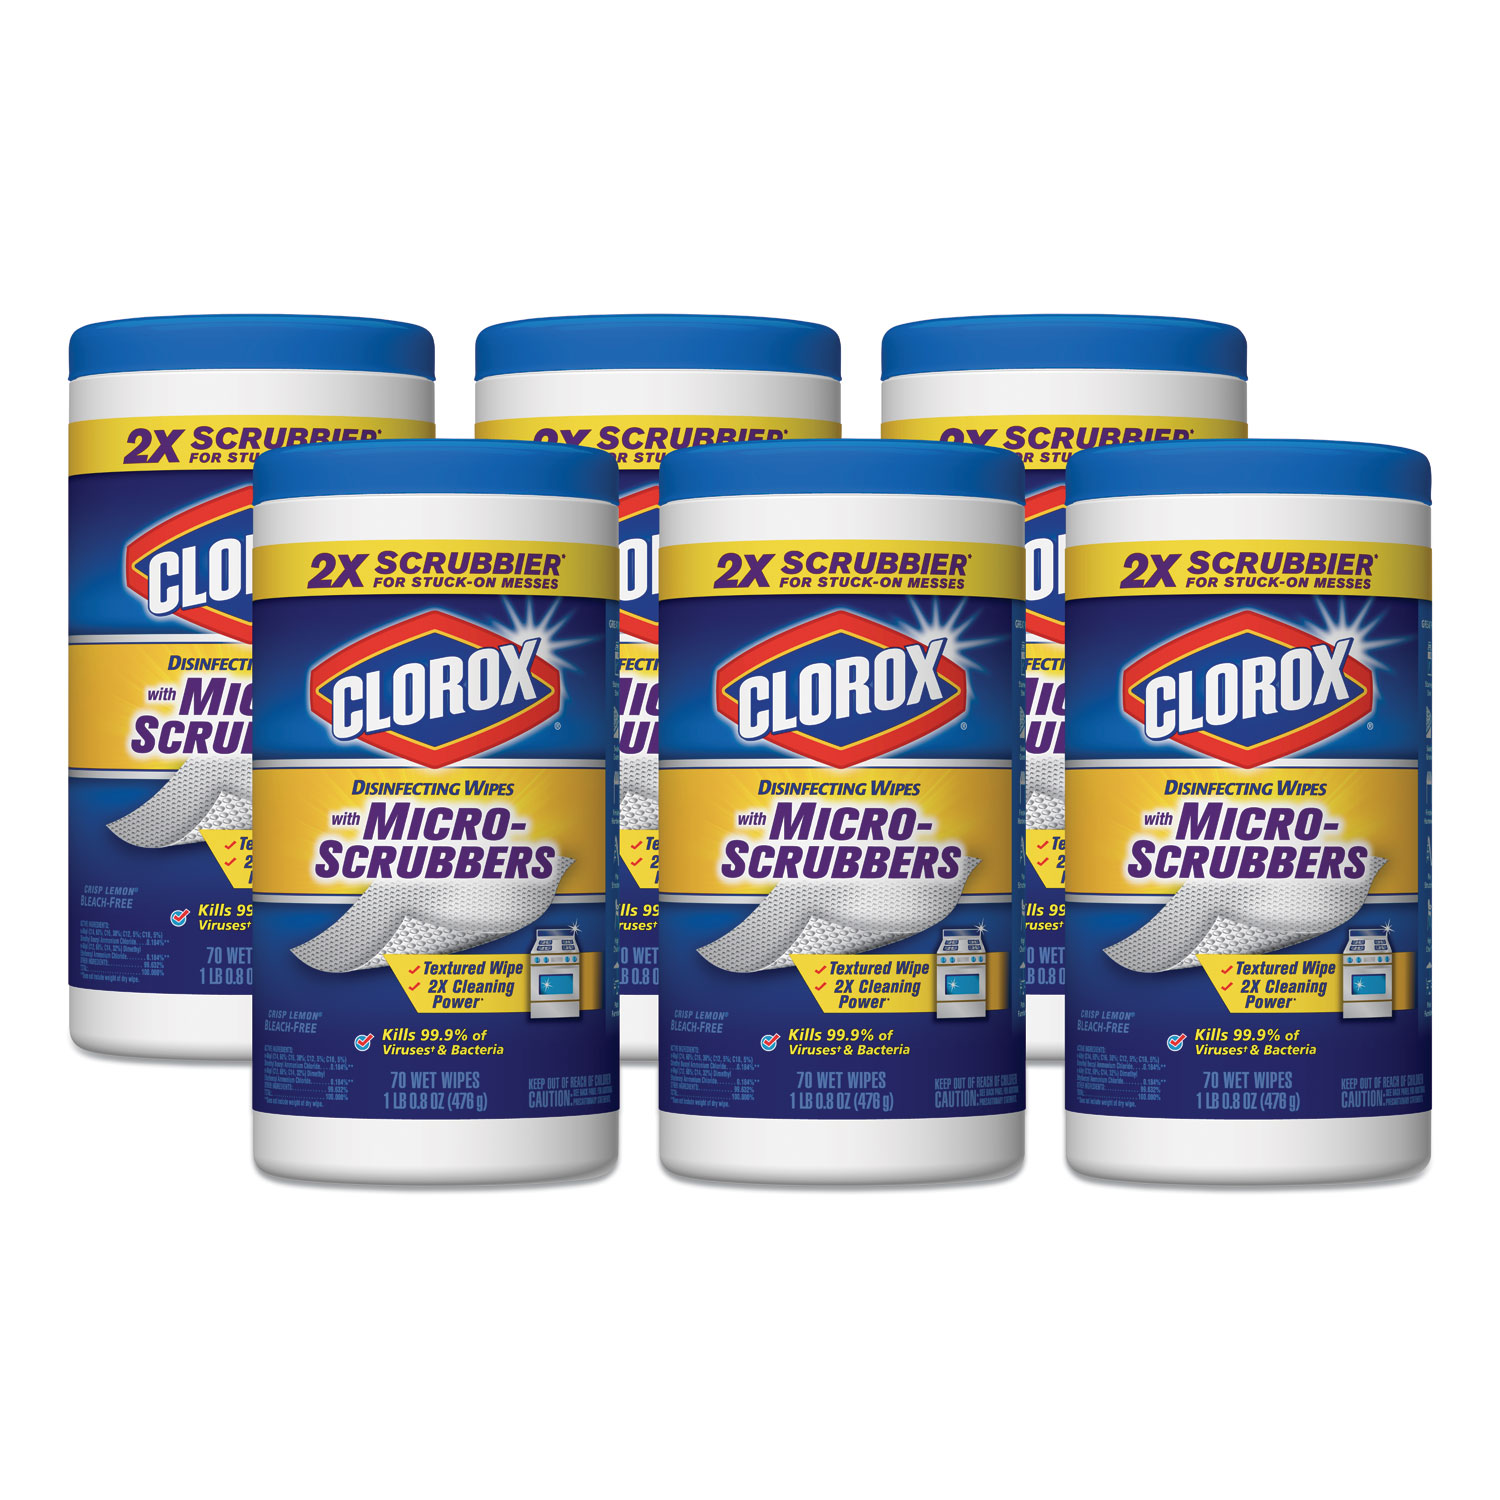  Clorox CLO 31270 Disinfecting Wipes with Micro-Scrubbers, Crisp Lemon, 7 x 8, 70/Canister, 6/CT (CLO31270CT) 